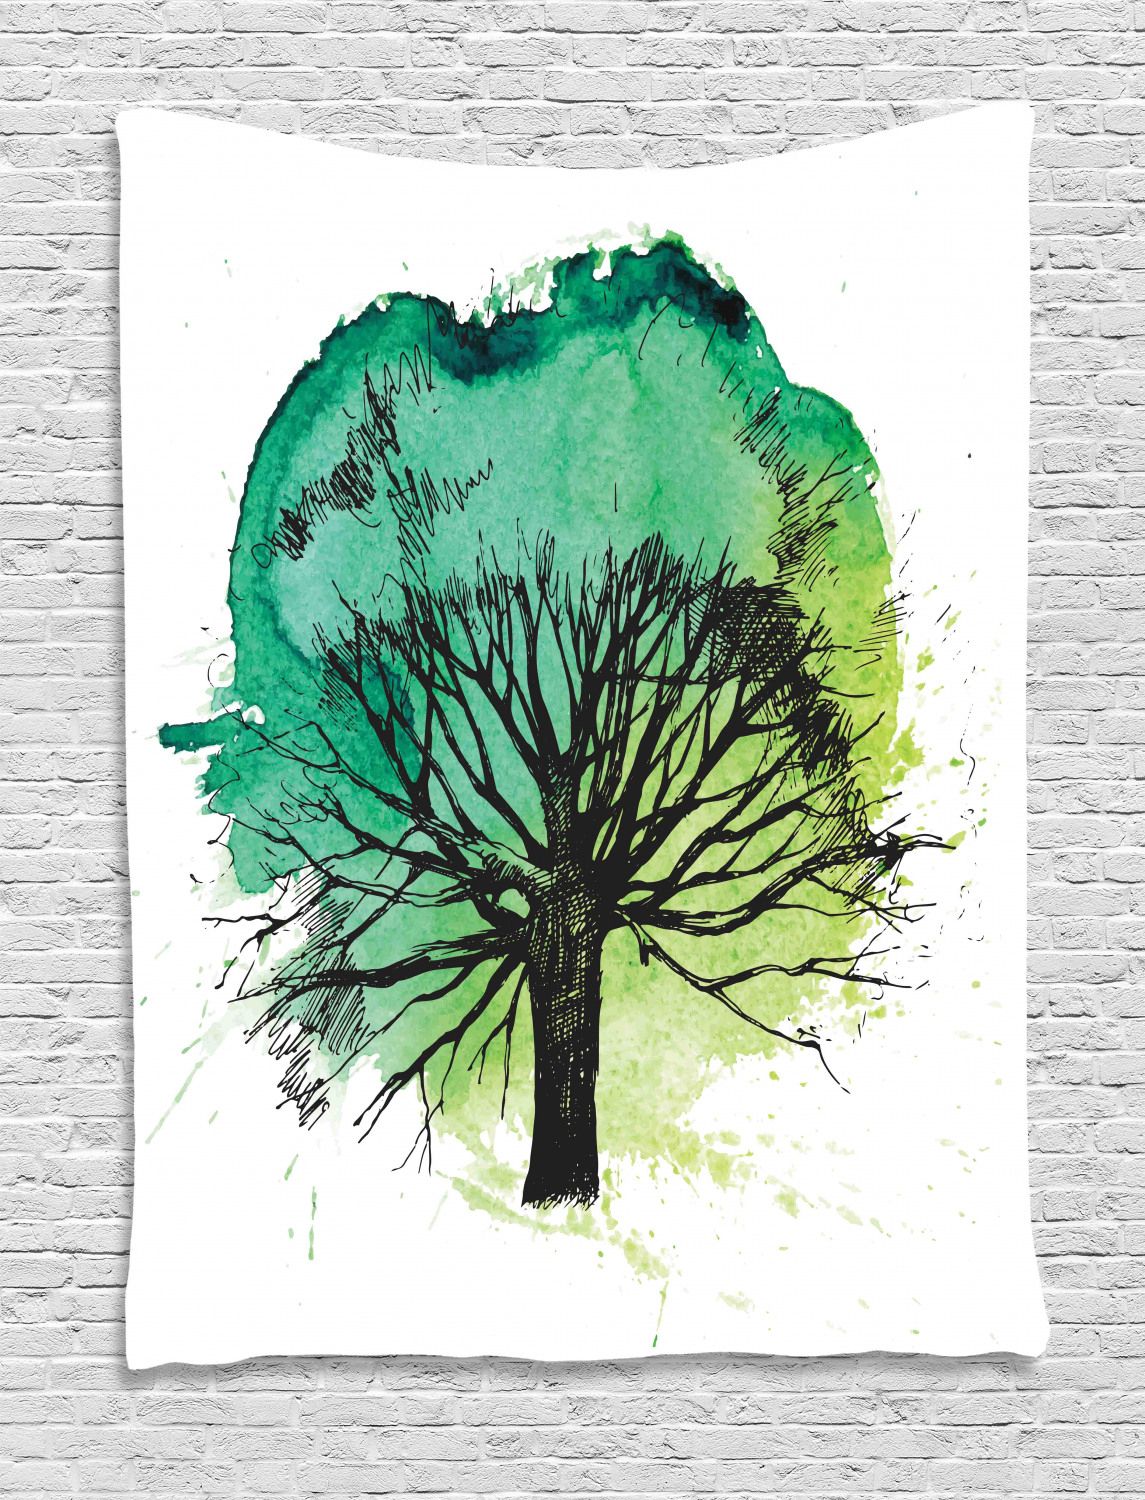 Willow Tree Tapestry, Sketched Silhouette With Branches And Blended  Watercolor, Wall Hanging For Bedroom Living Room Dorm Decor, 40"w X 60"l,  Yellow For 2018 Blended Fabric In His Tapestries And Wall Hangings (View 20 of 20)